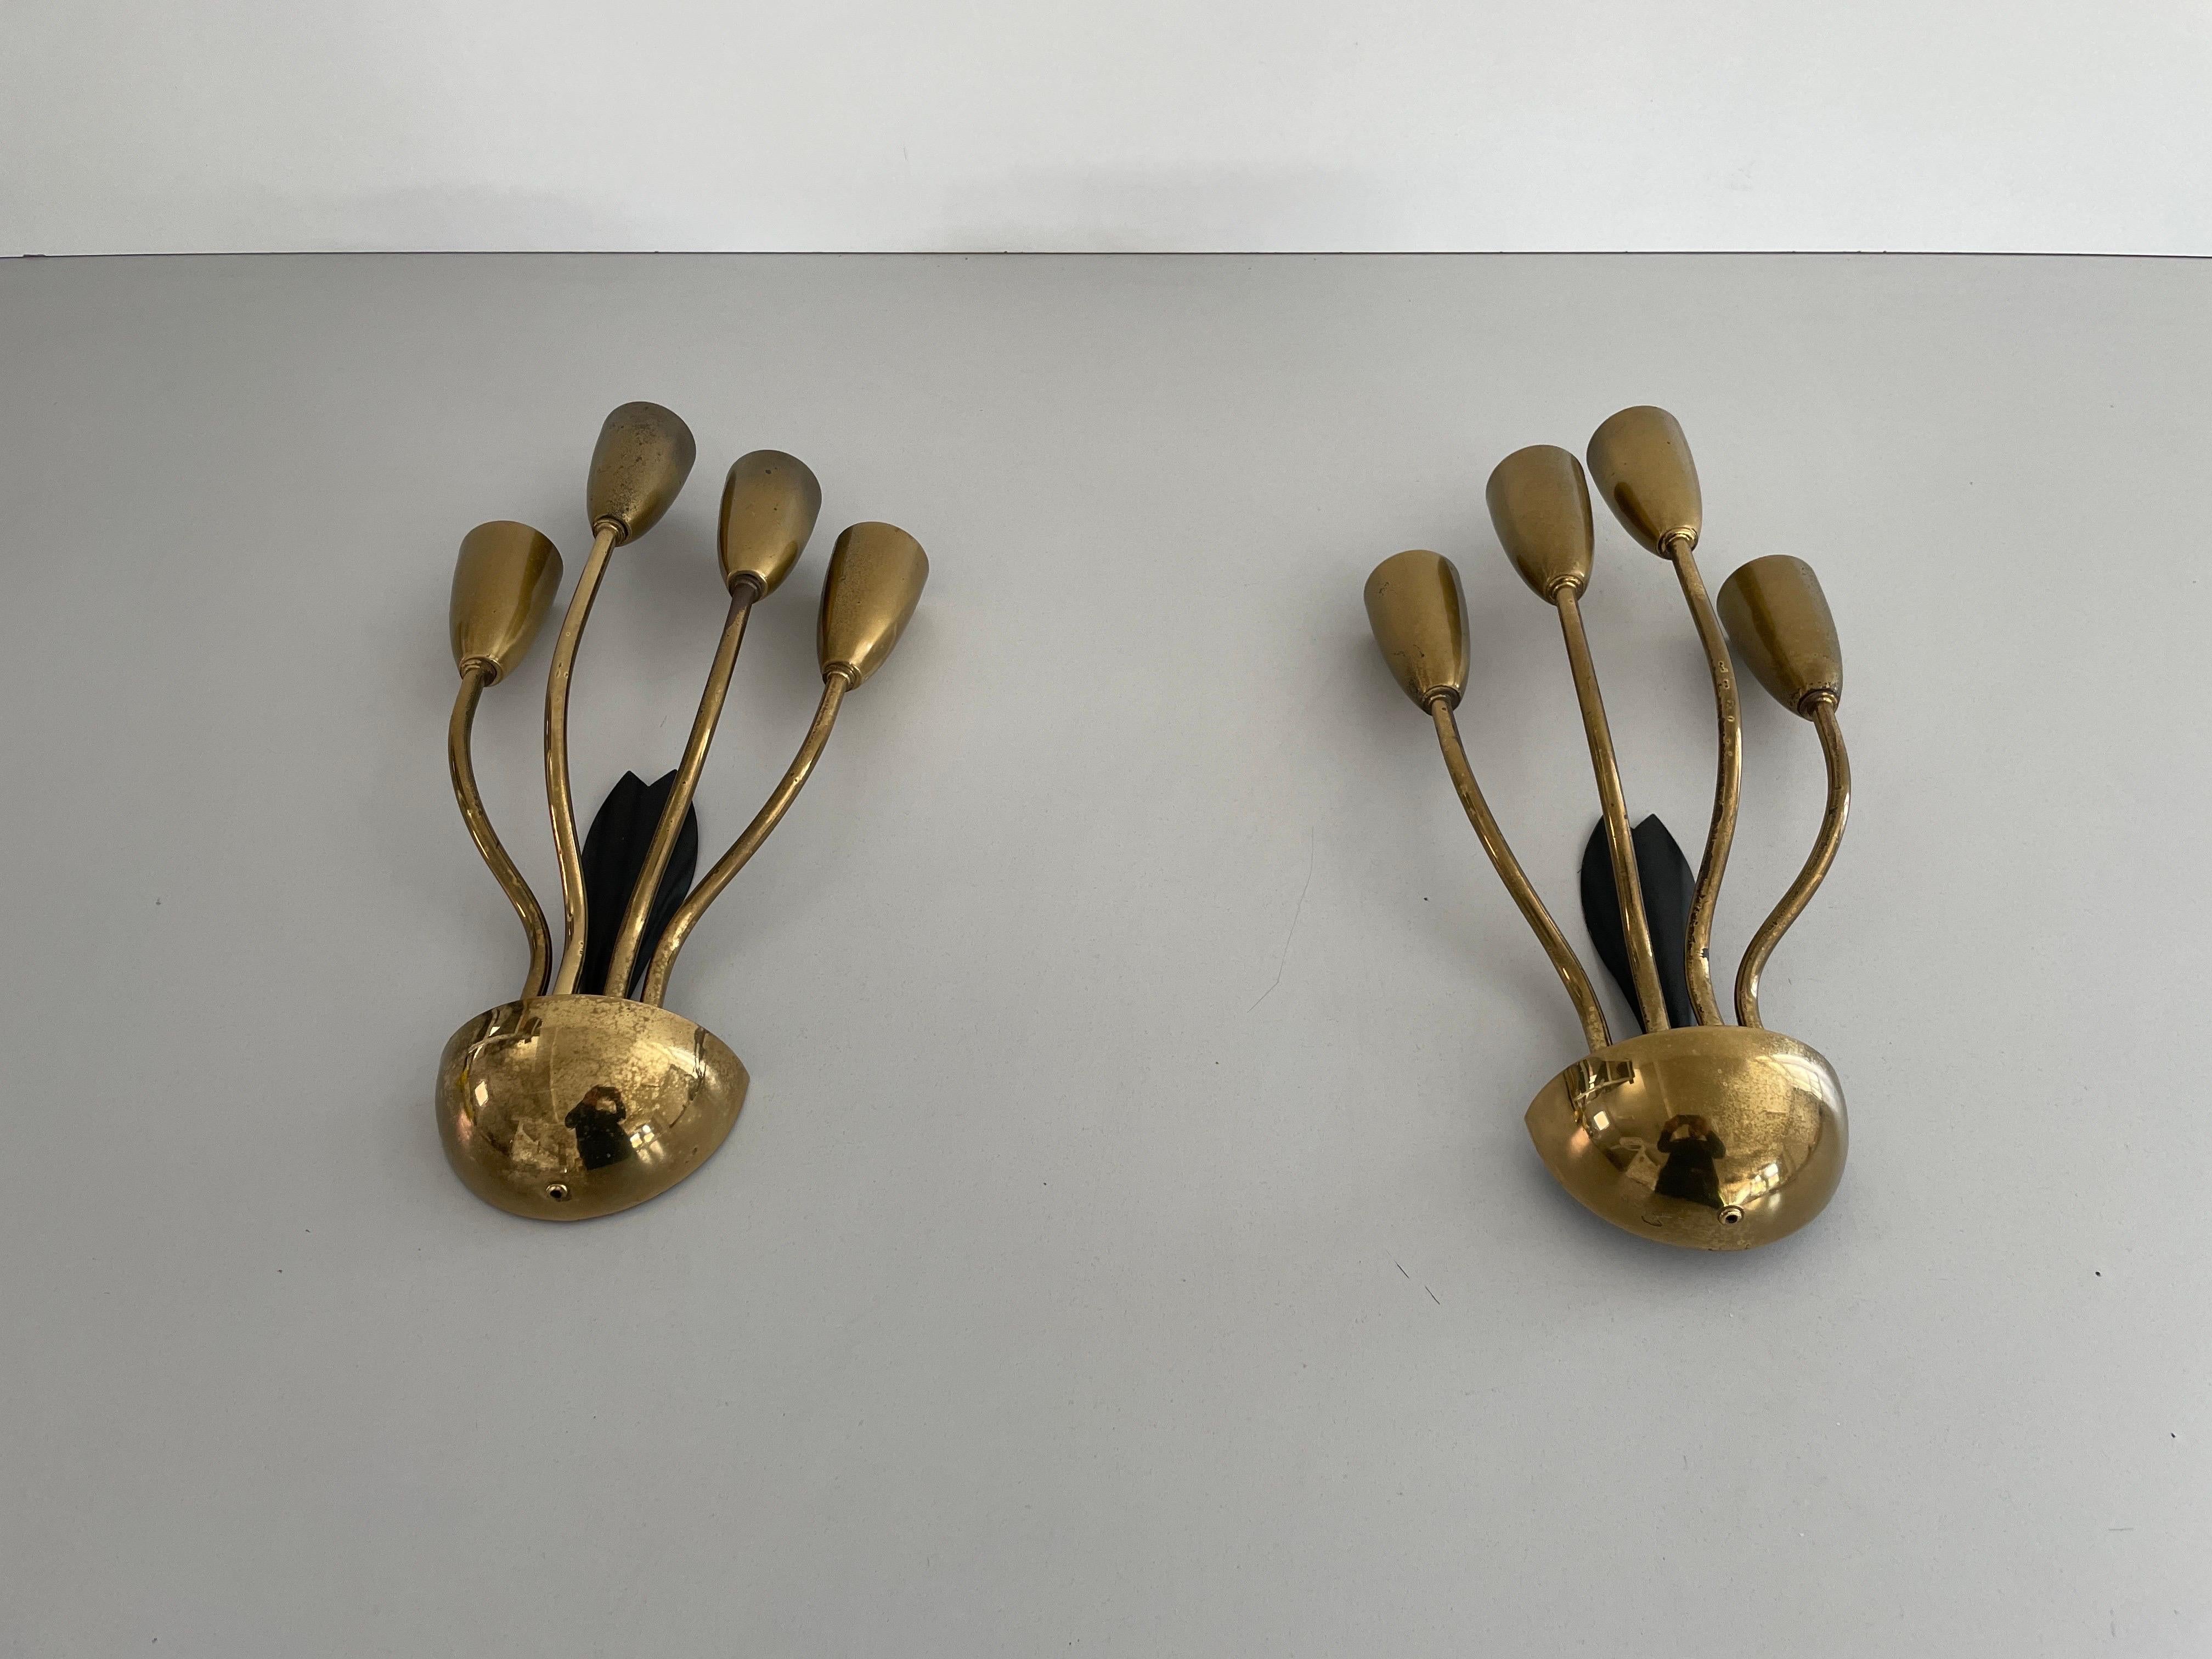 4-armed Flower Design Brass Sputnik Pair of Sconces, 1950s, Germany
Probably Manufactured for a cinema in around Berlin

Very elegant and Minimalist wall lamps
Lamp is in very good condition.

These lamps works with 4x E14 standard light bulbs.